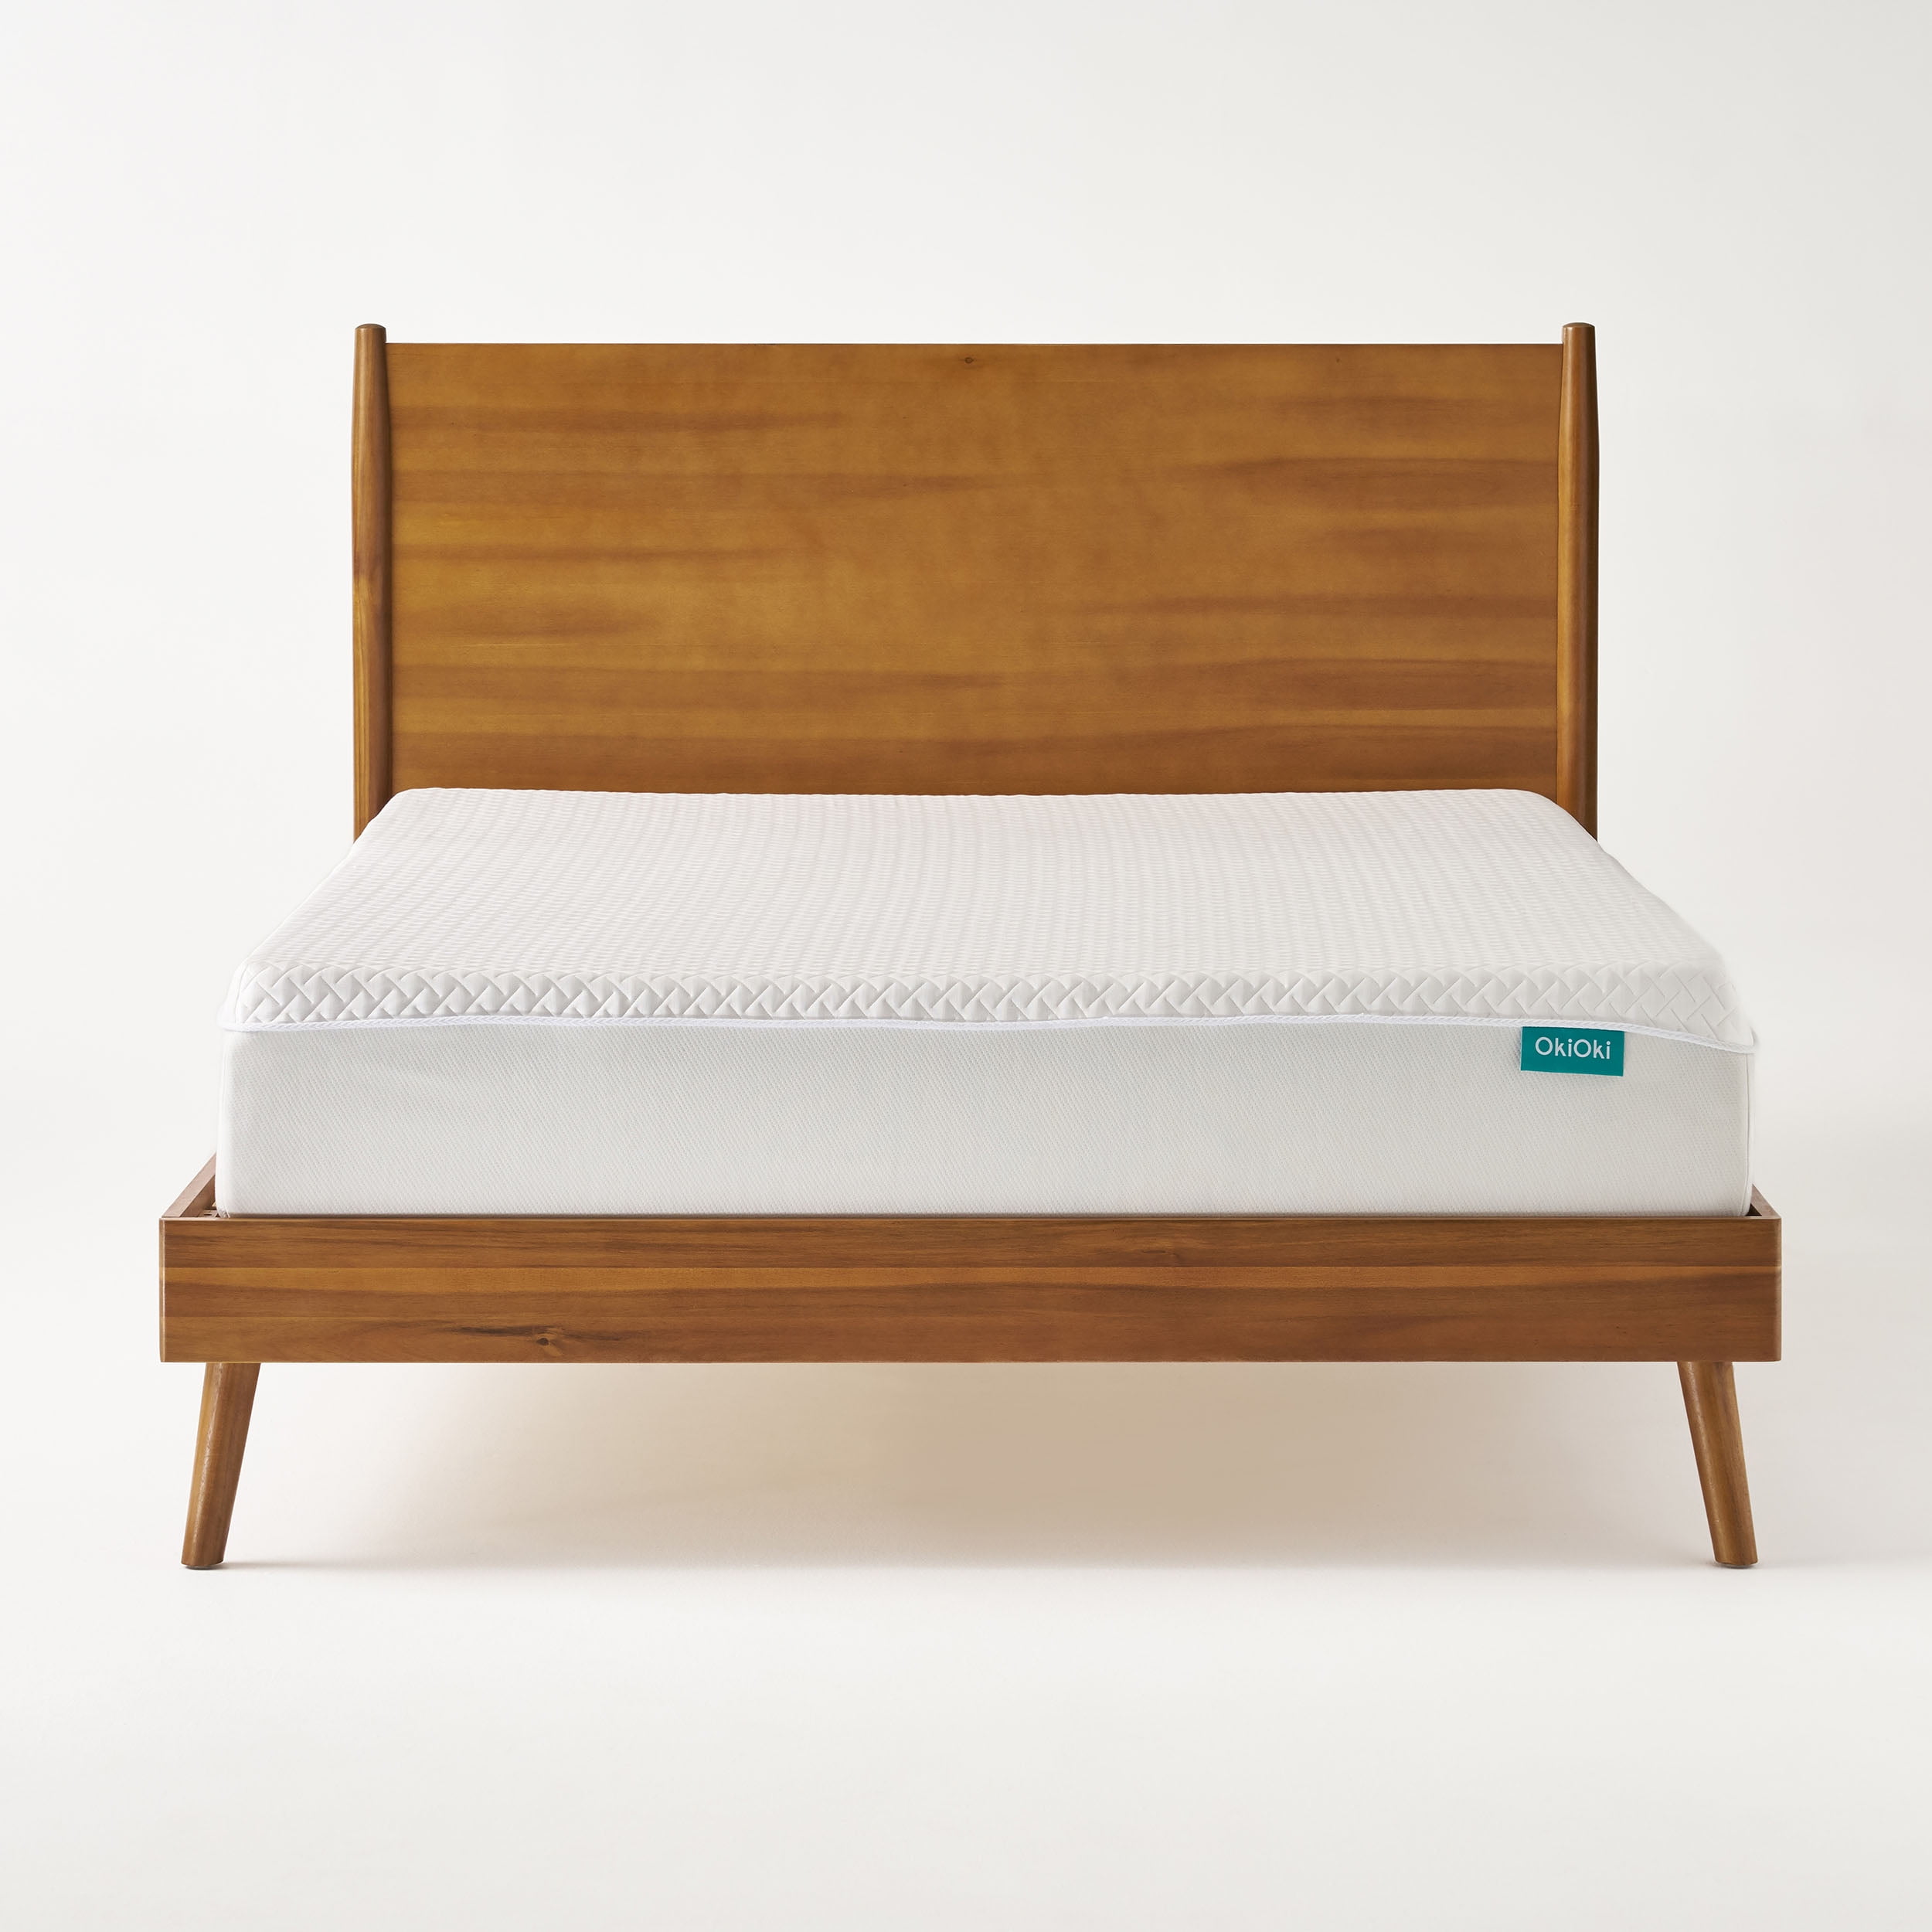 Okisoft Mattresid Century Bed, How To Raise Twin Bed Frame